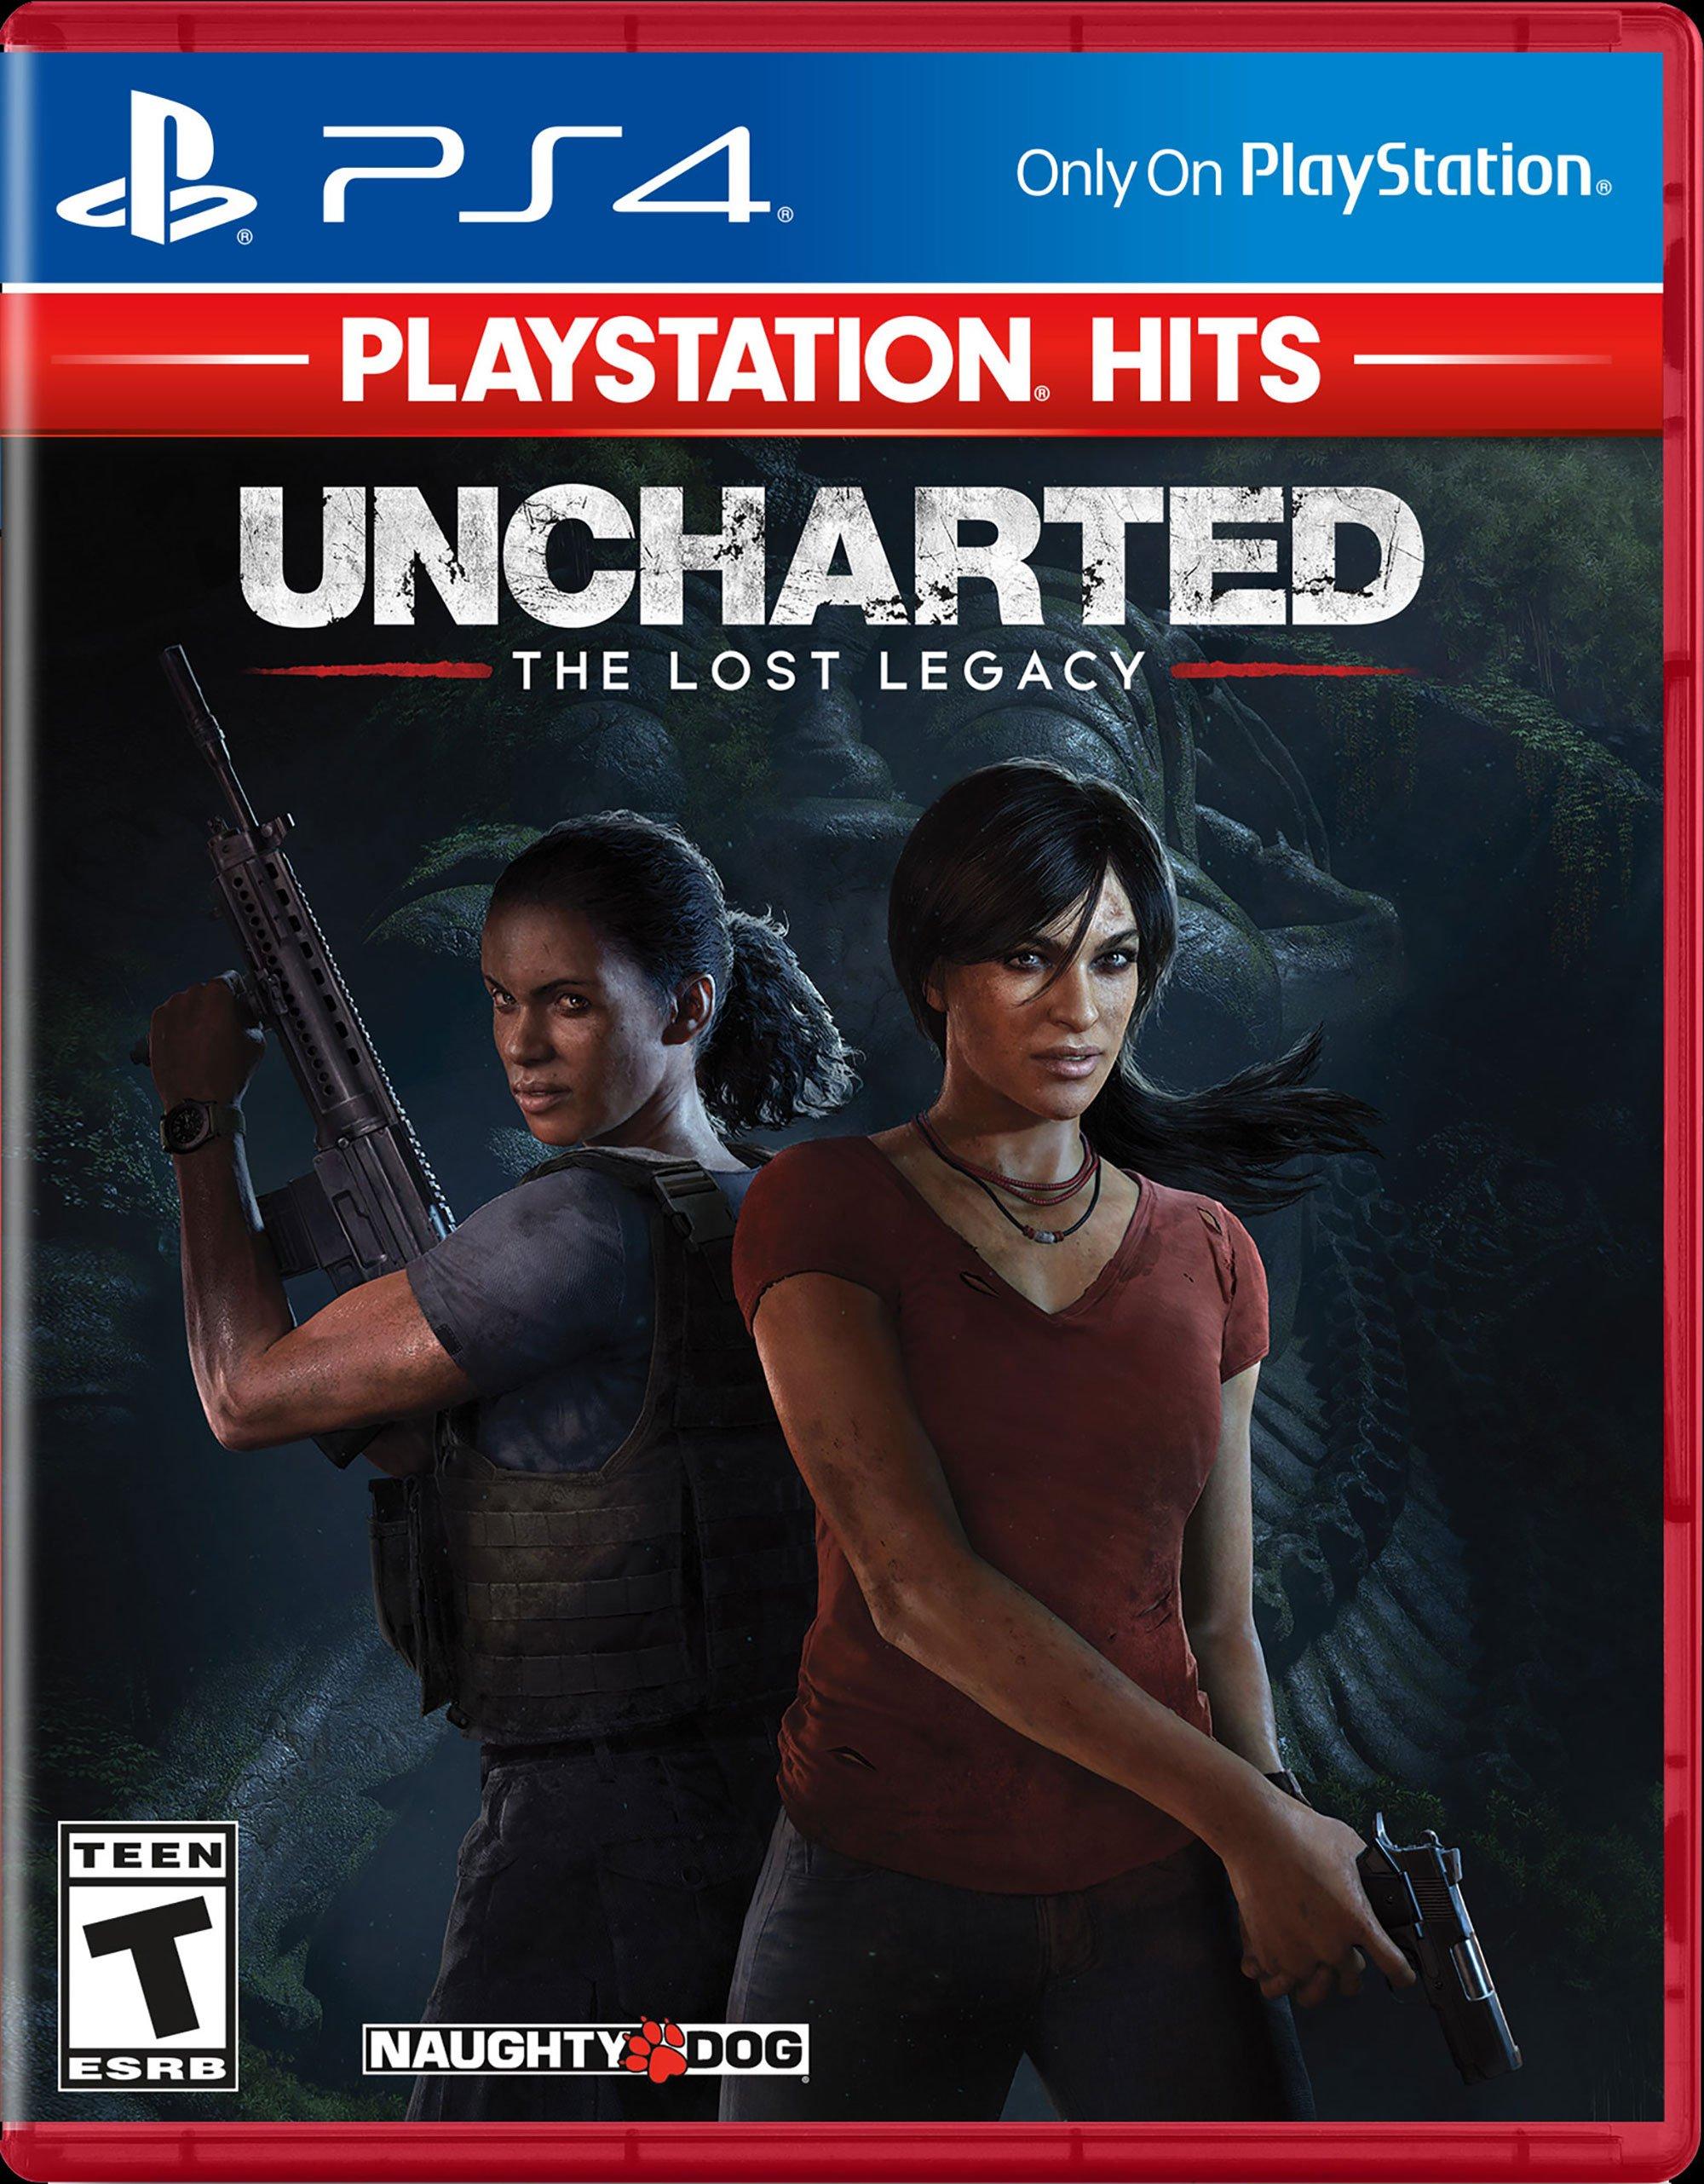 uncharted 4 for ps3